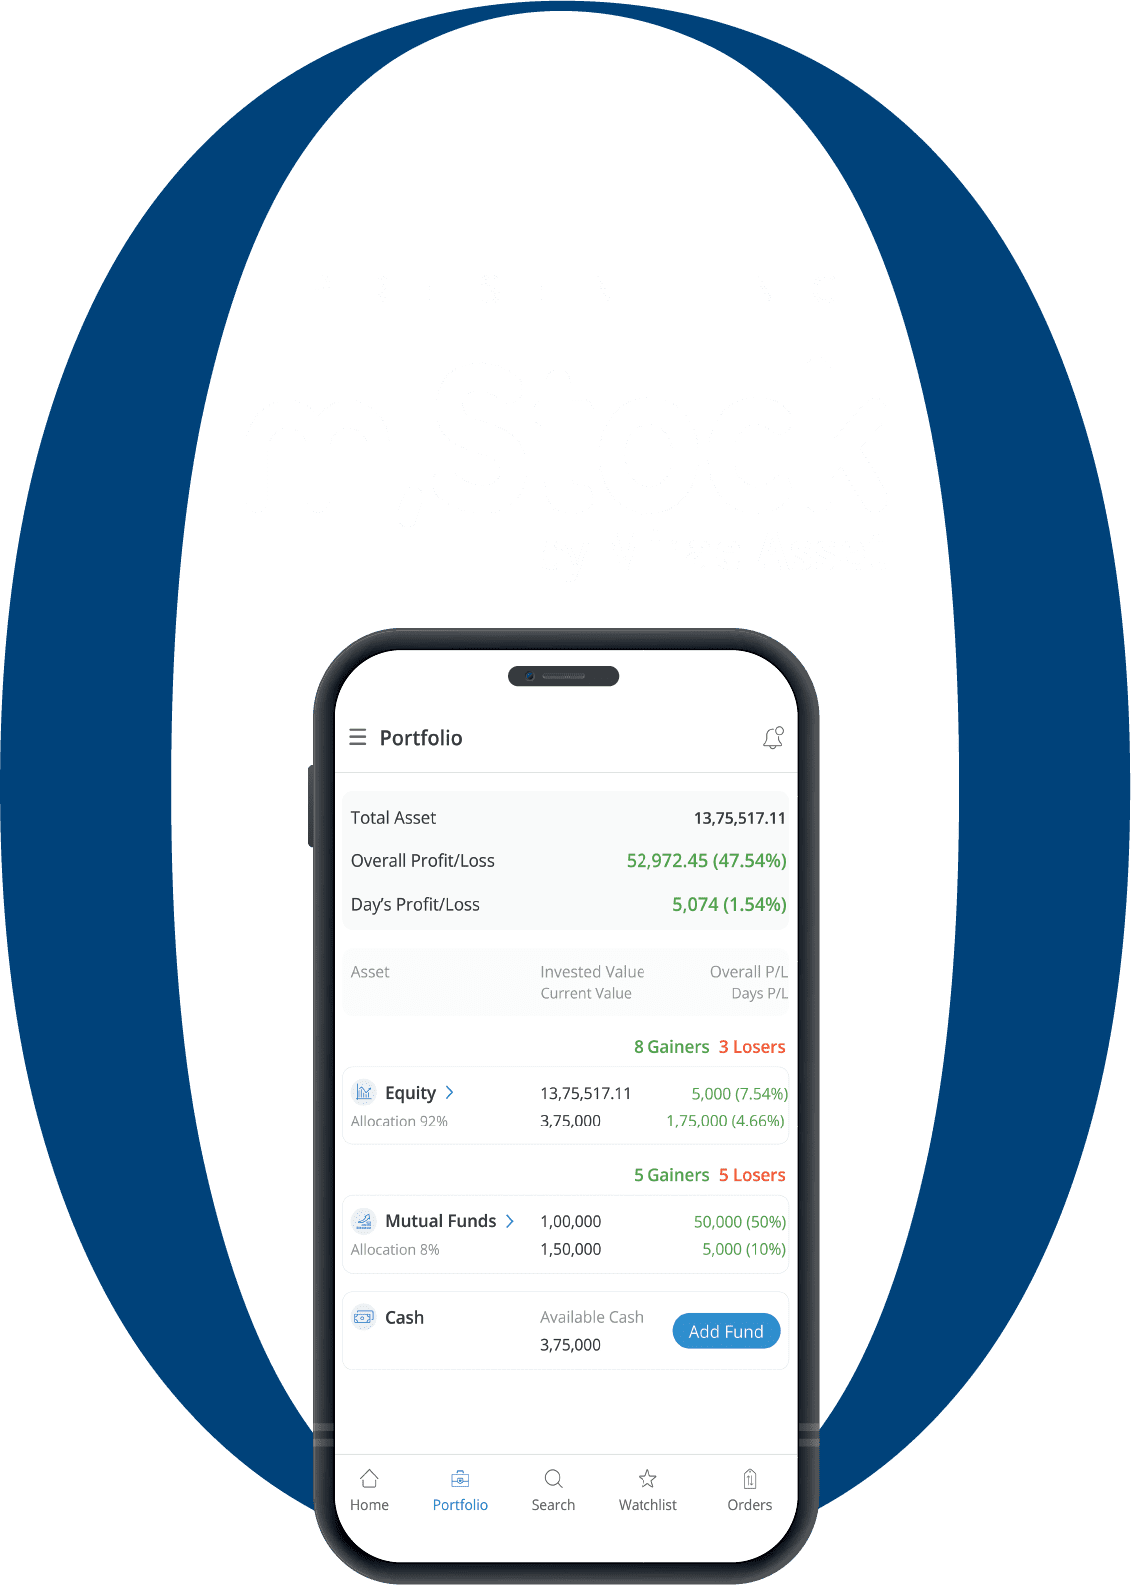 m.Stock by Mirae Asset